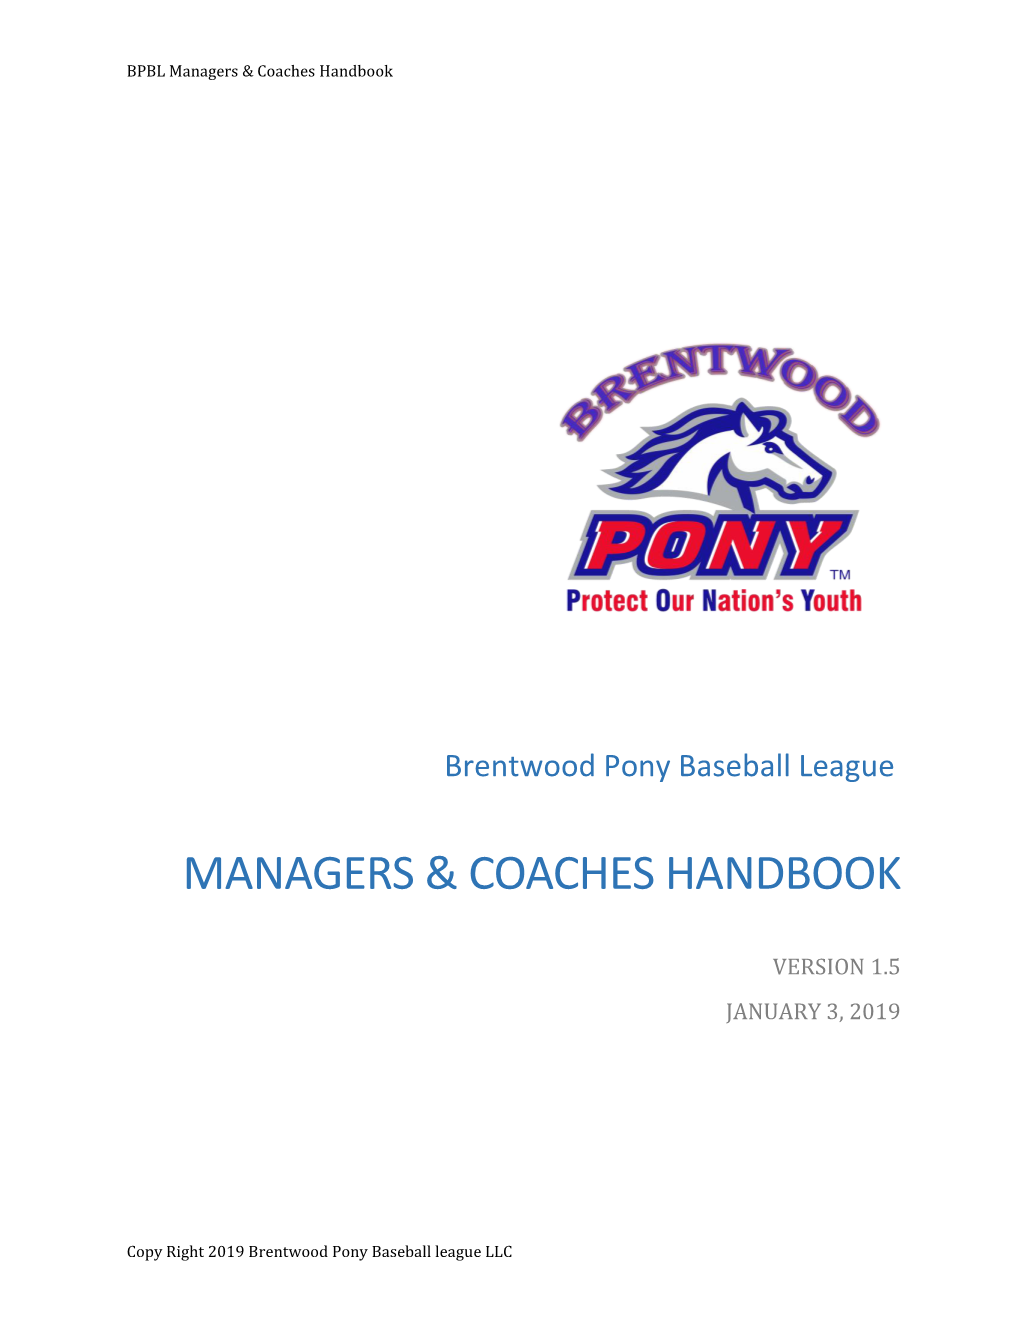 Managers & Coaches Handbook